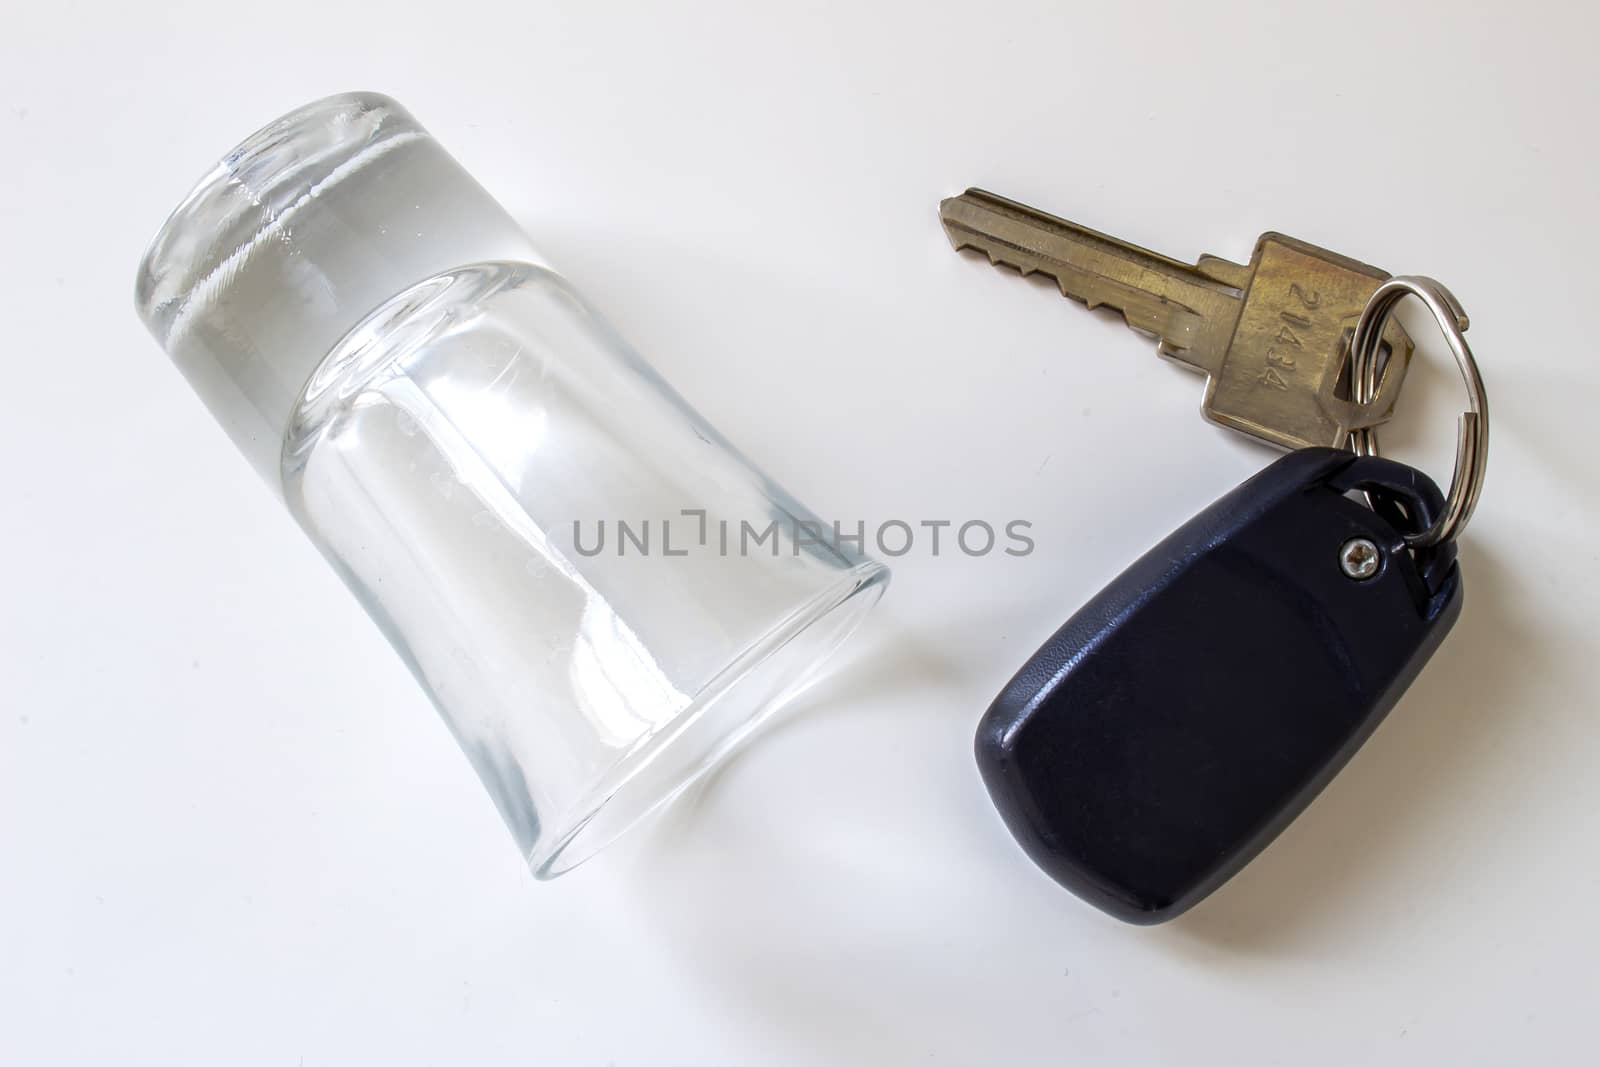 Don't drink and drive. An empty shot glass on a white background with car keys by oasisamuel